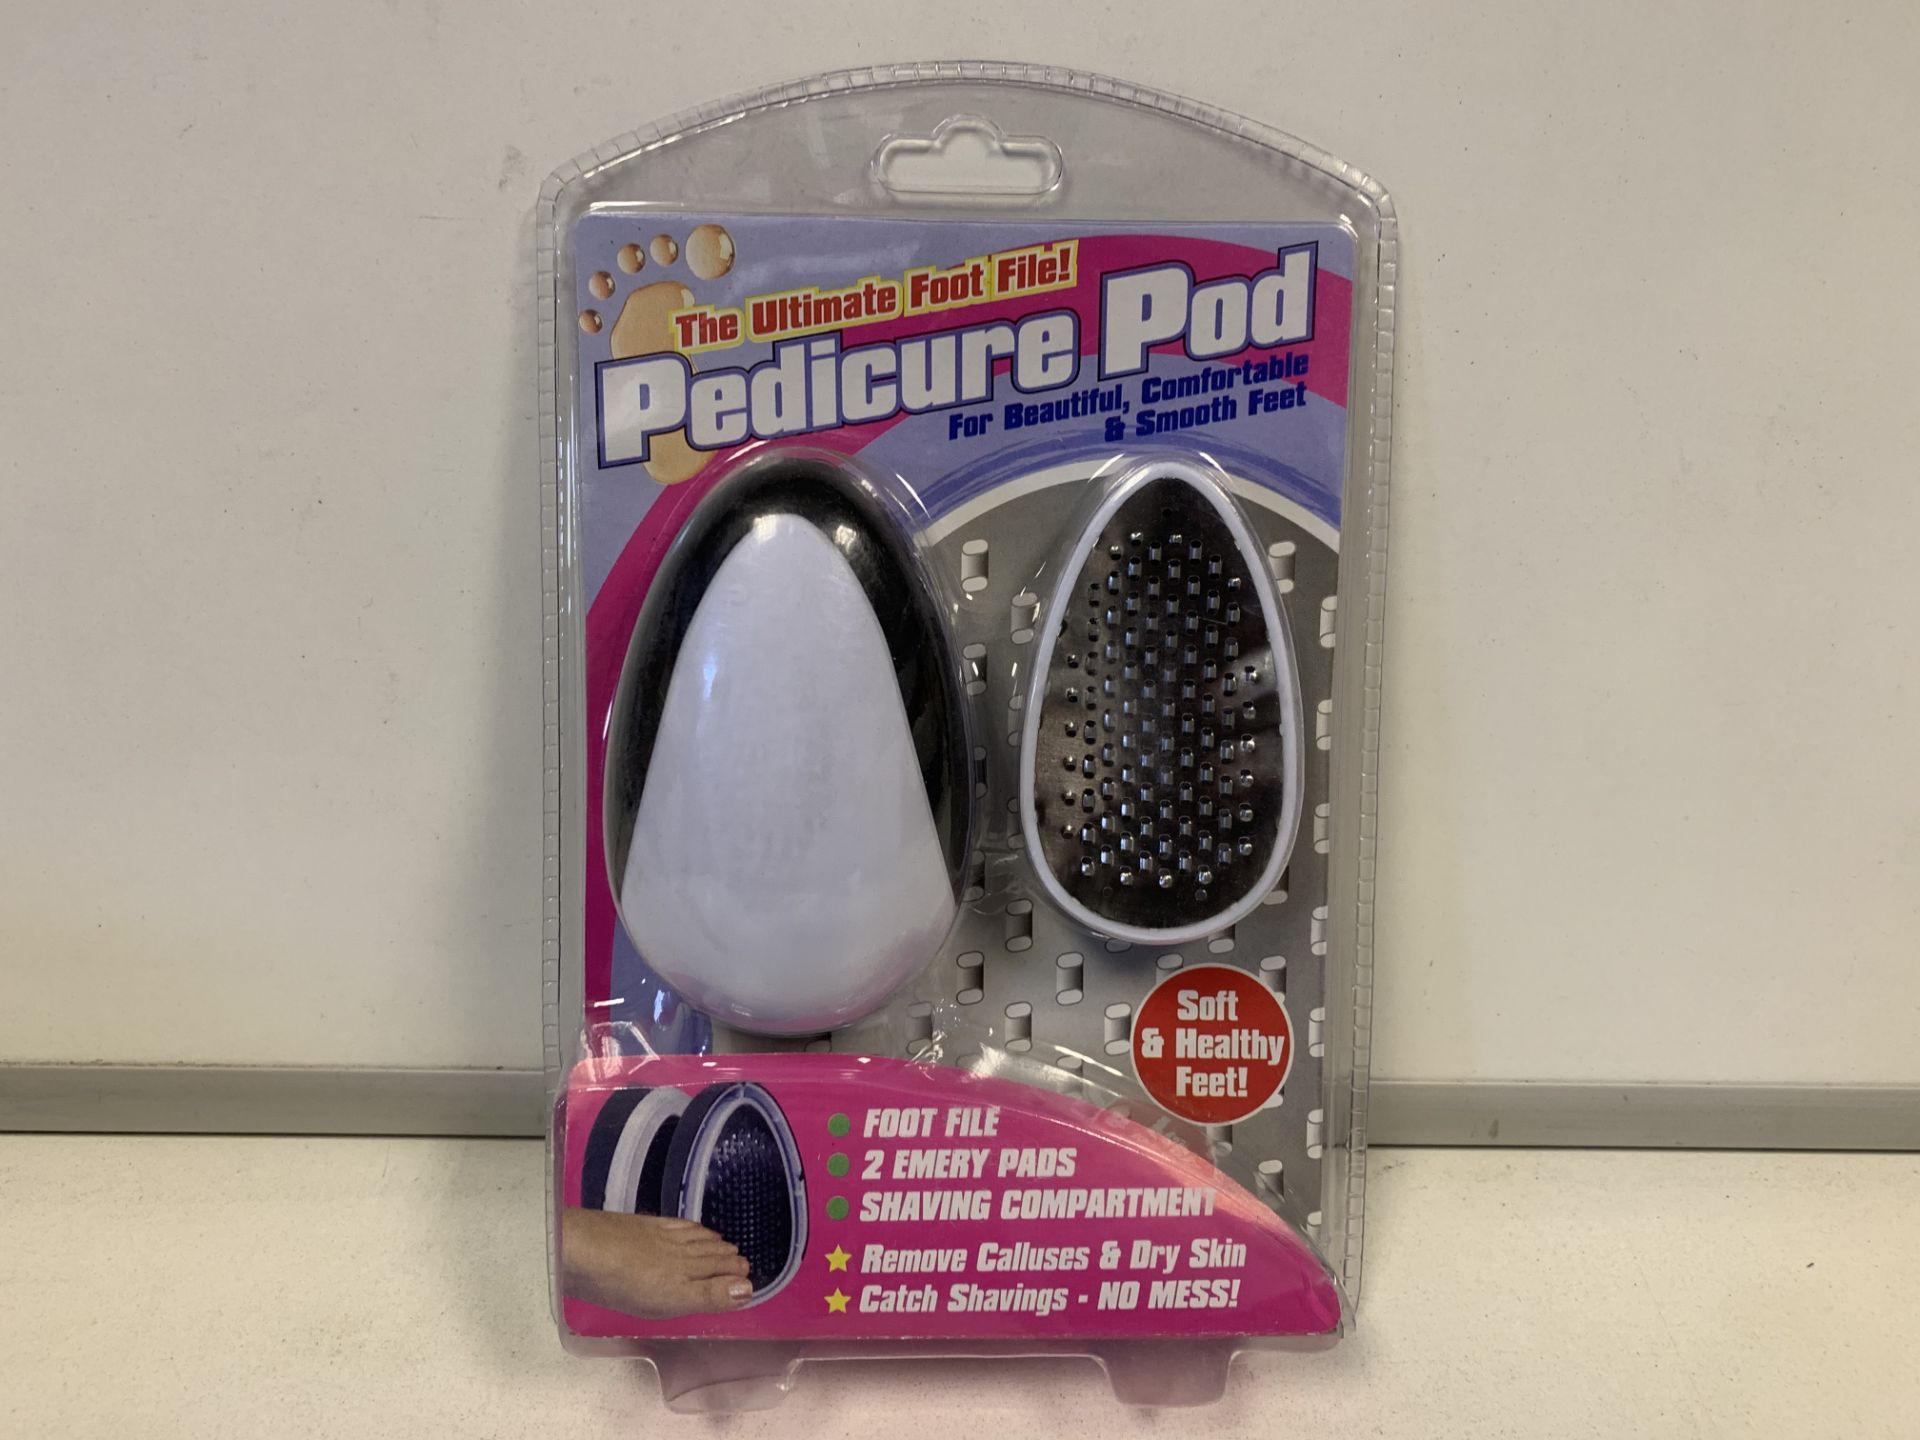 72 x NEW PEDICURE POD - THE ULTIMATE FOOT FILE FOR SOFT & HEALTHY FEET.